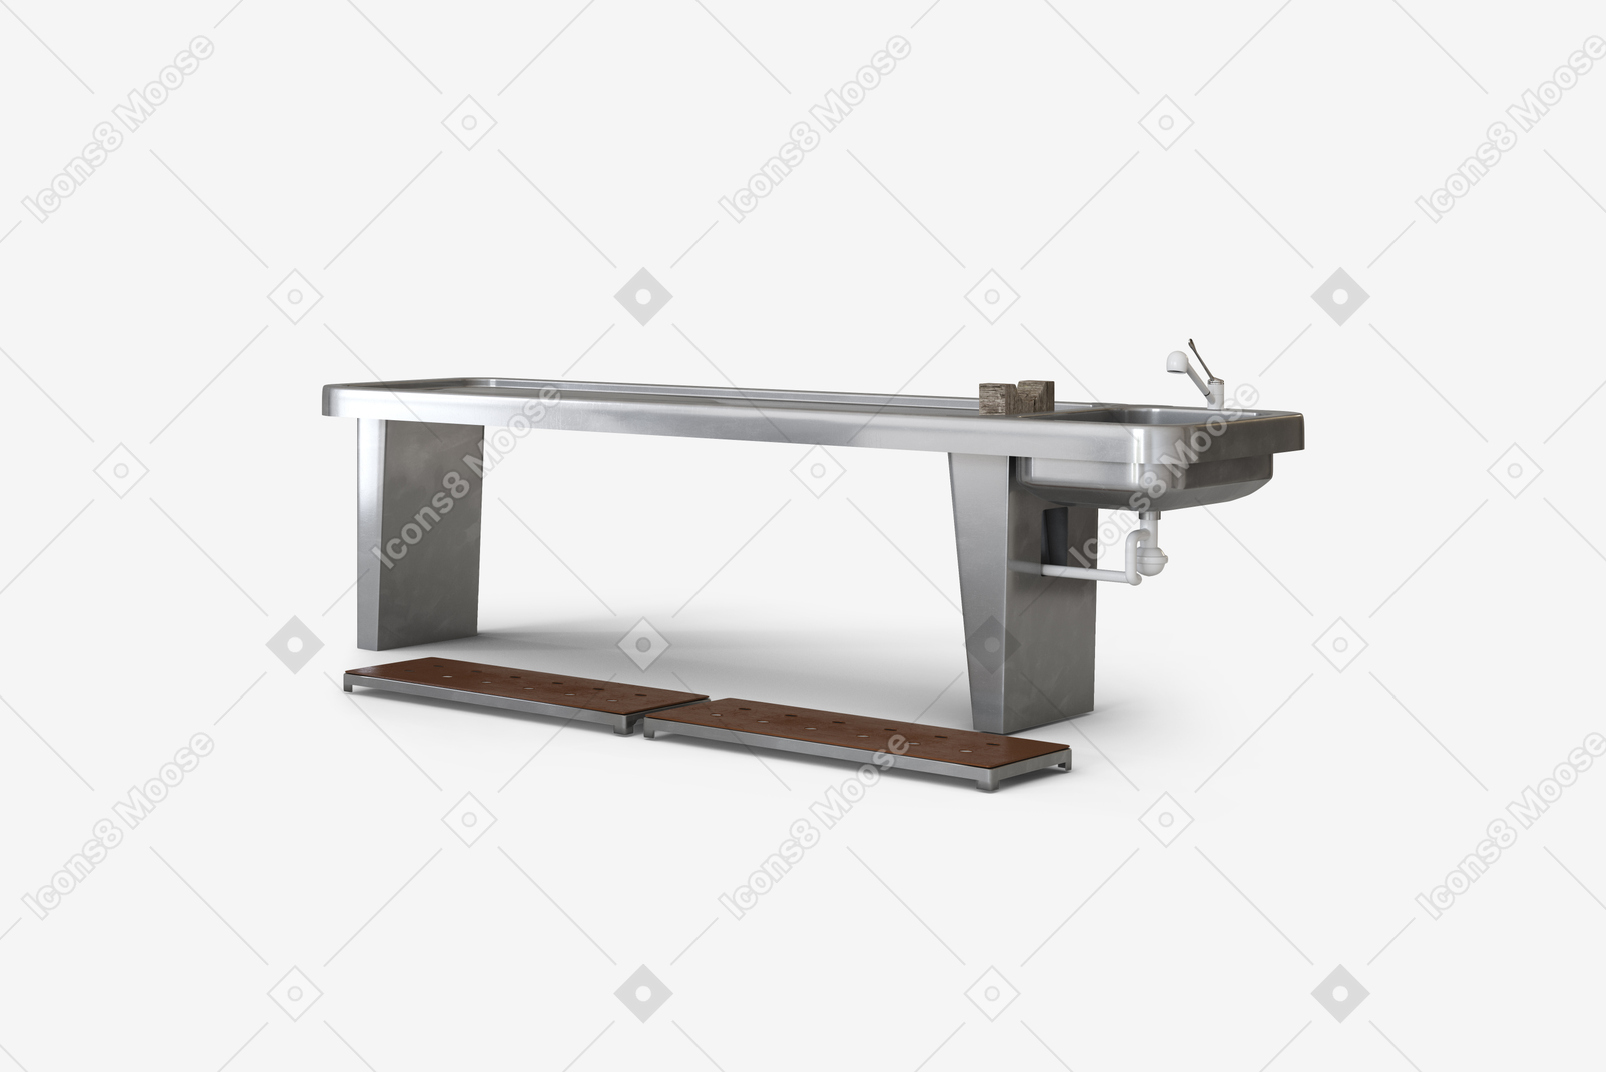 An autopsy table on the white background